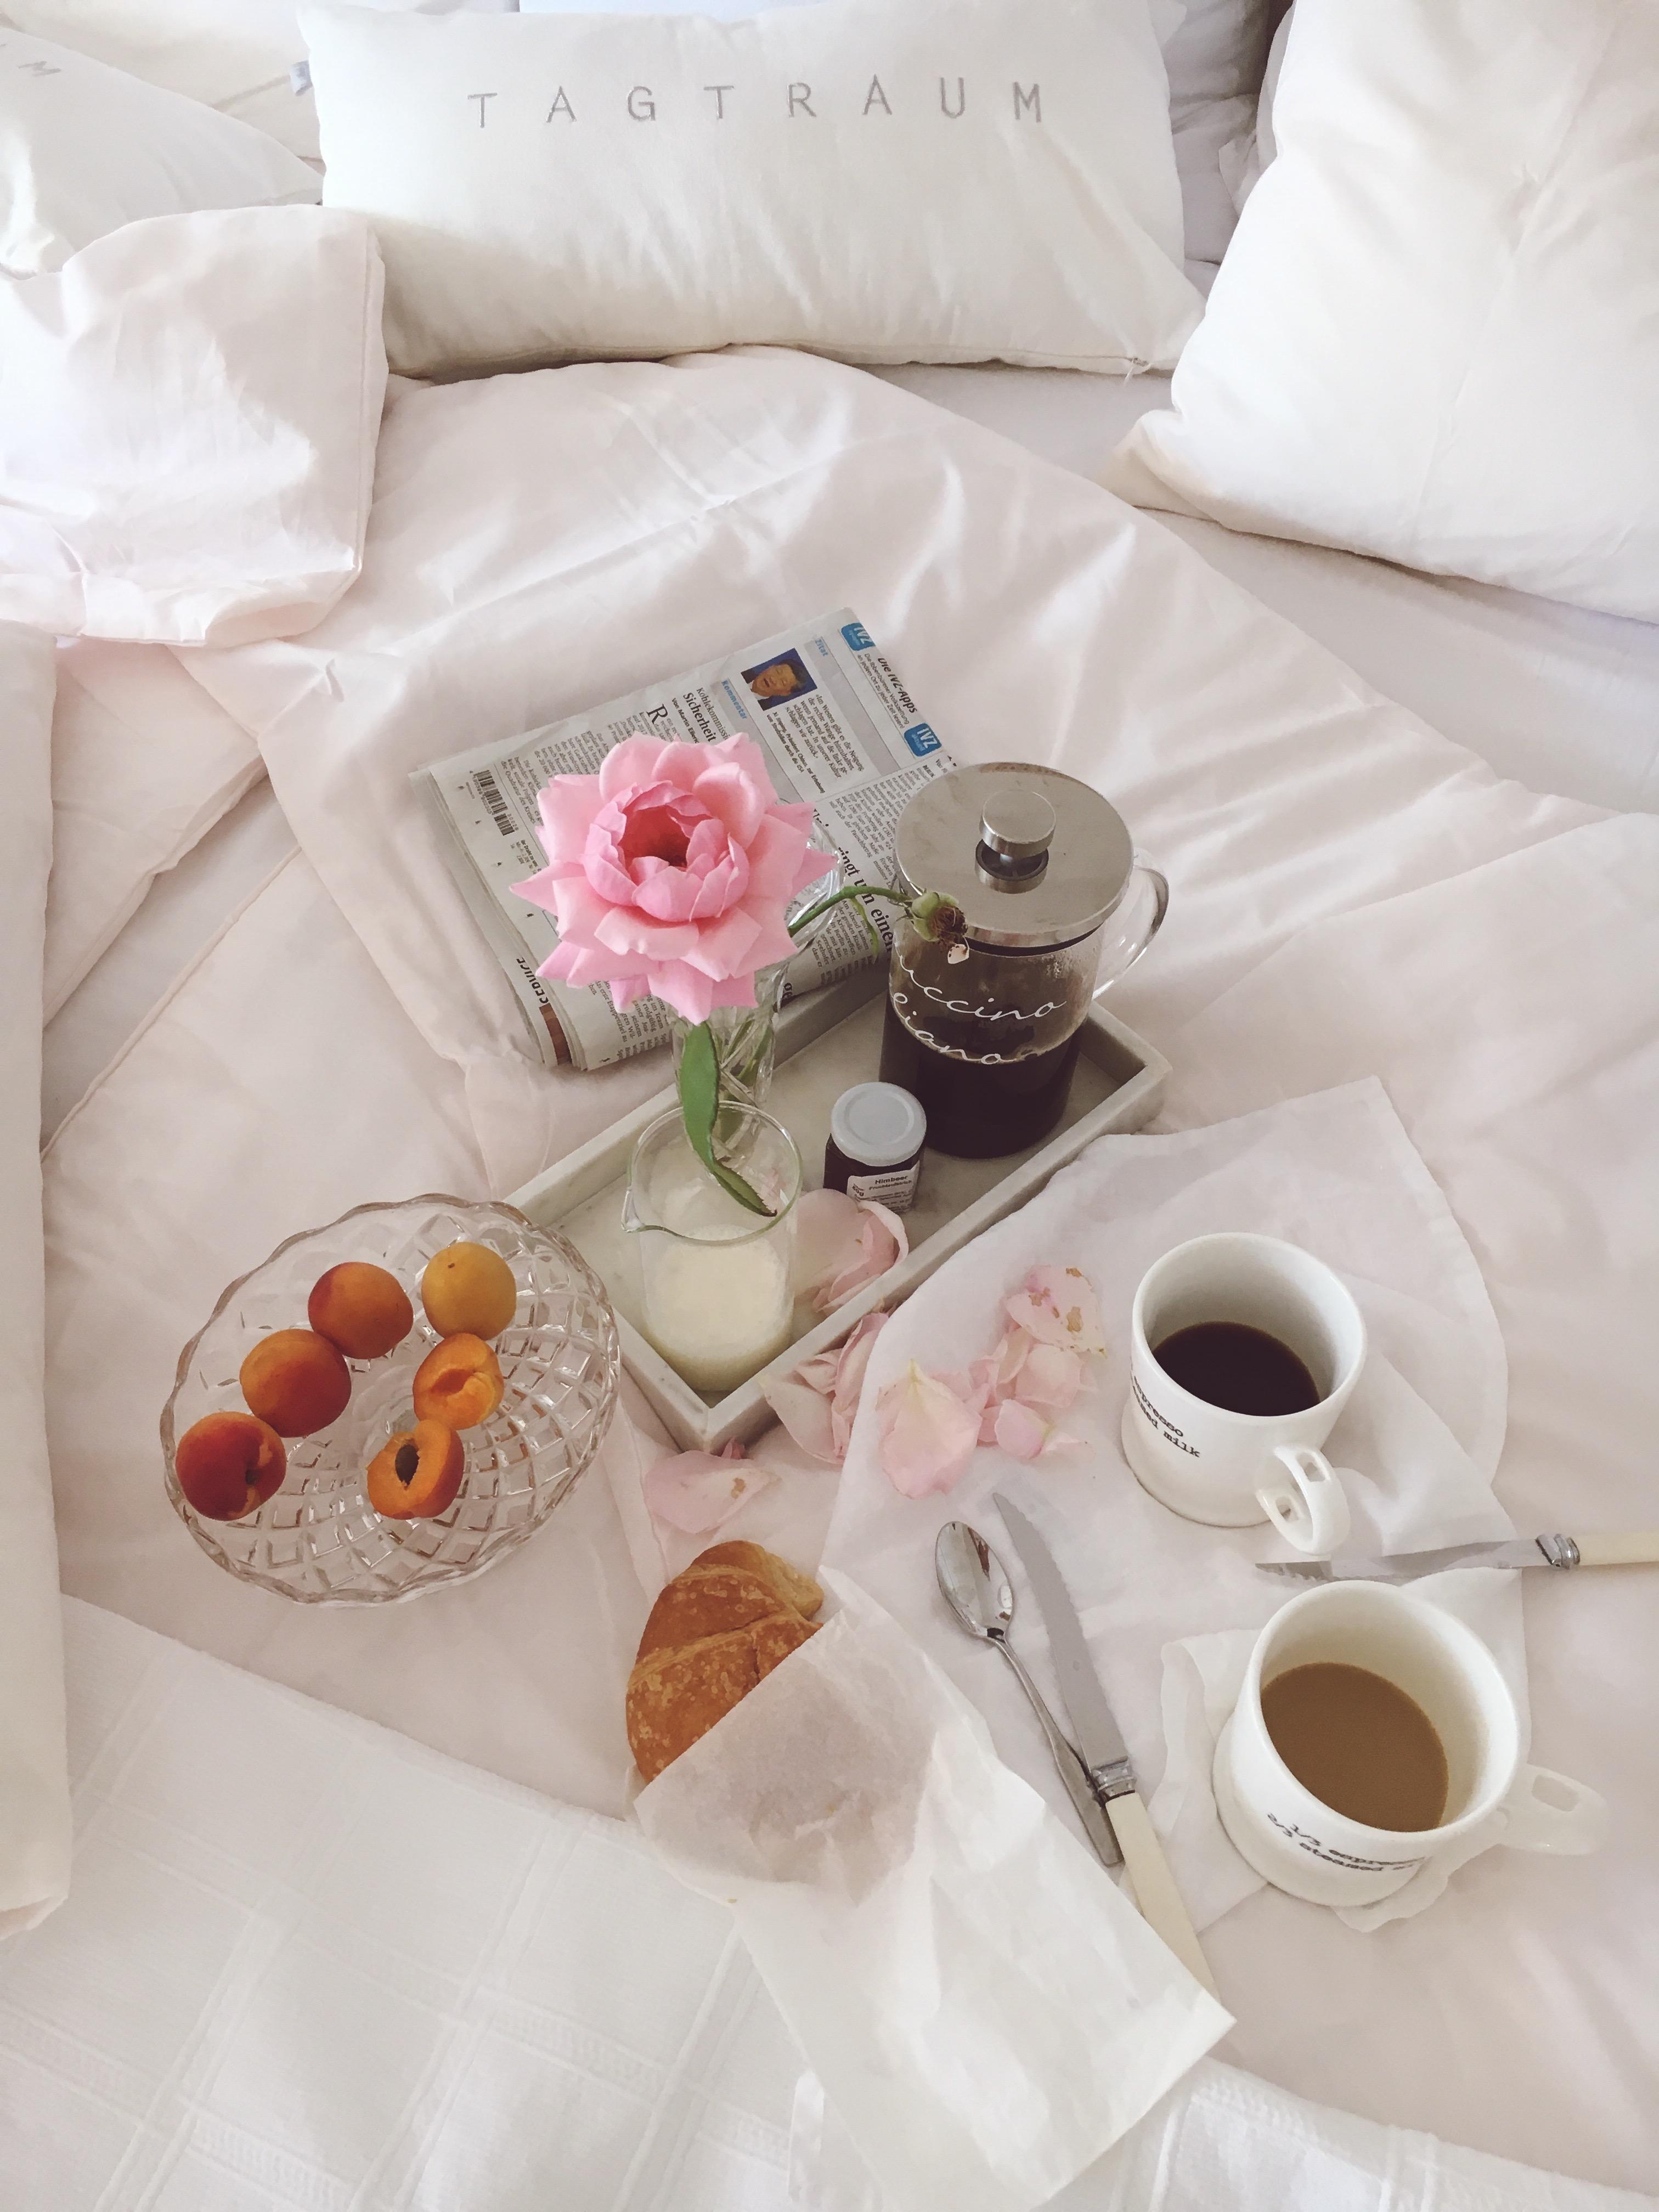 French breakfast at Home 💗☀️☕️
instagram: frenchhomeinspiration
#interior